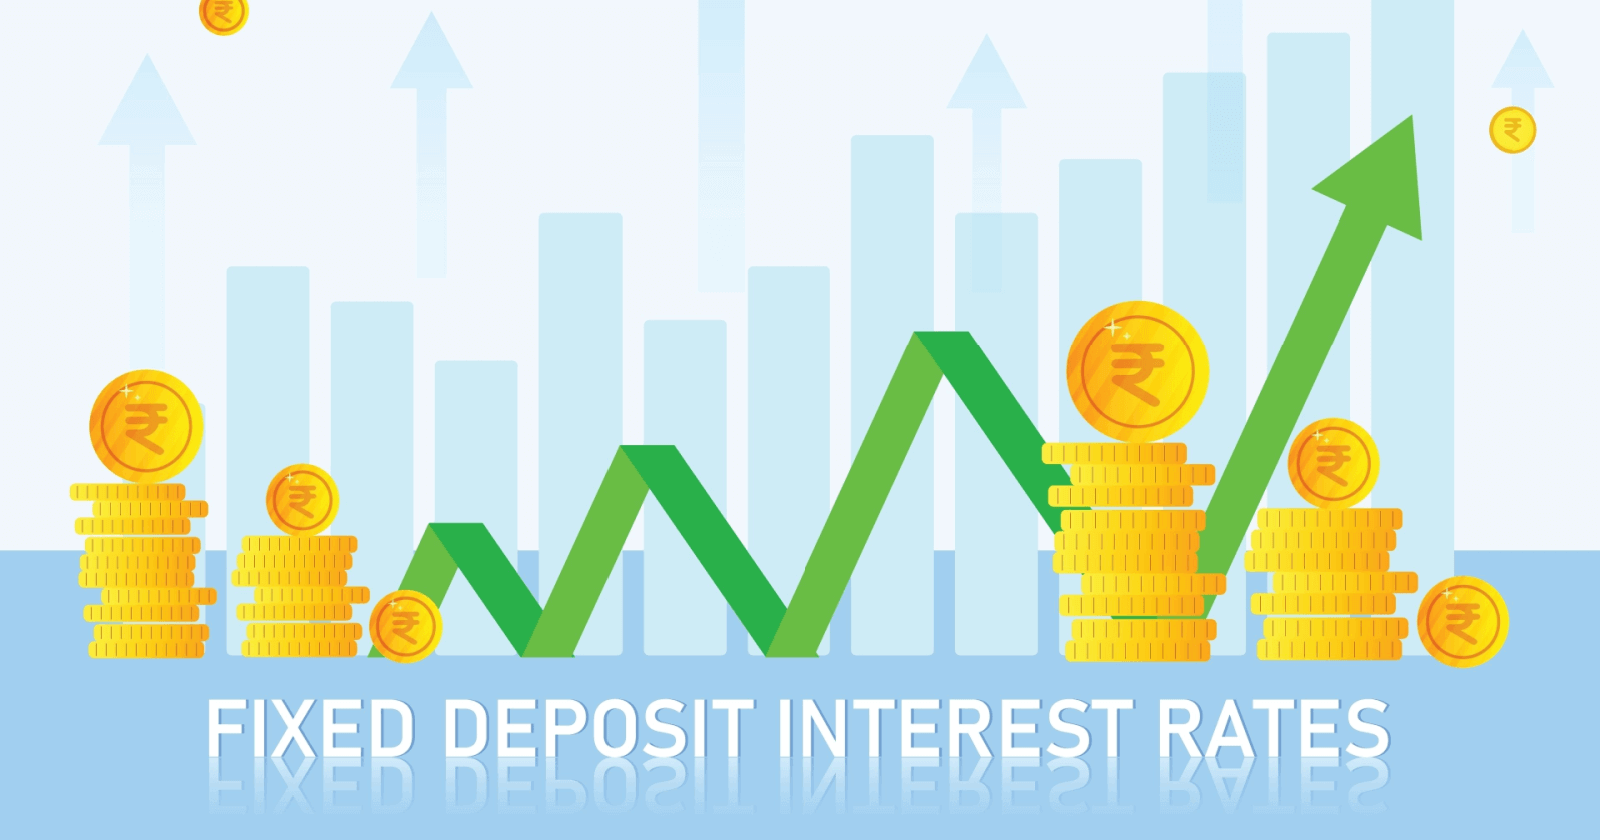 Explained: Fixed Deposit Interest Rates in India